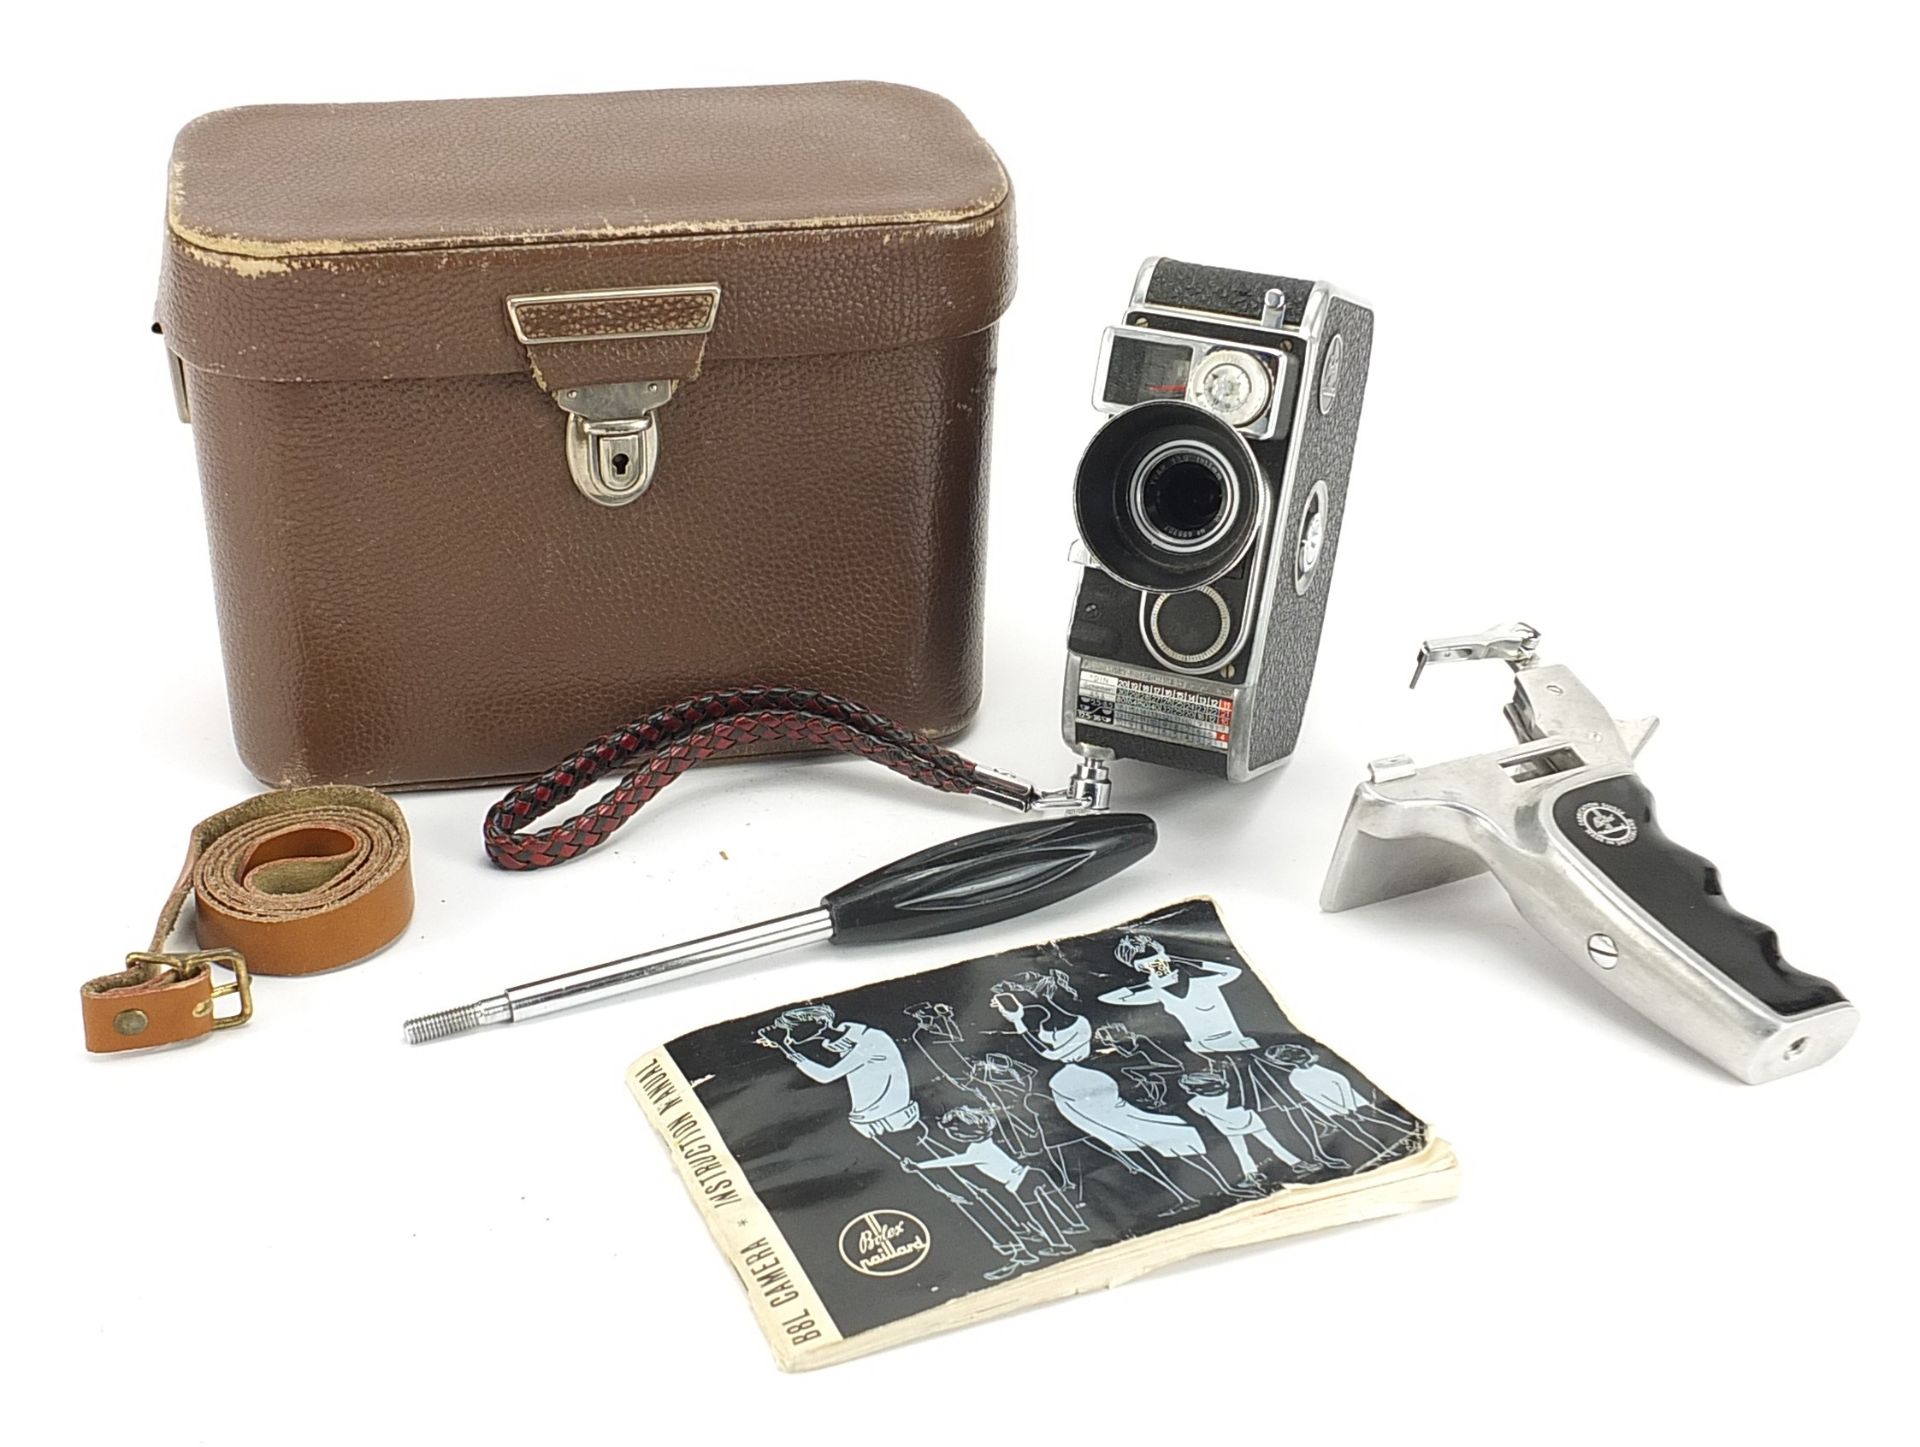 Bolex Paillard B8L camera with handle, case and instuctions, the case 20cm wide